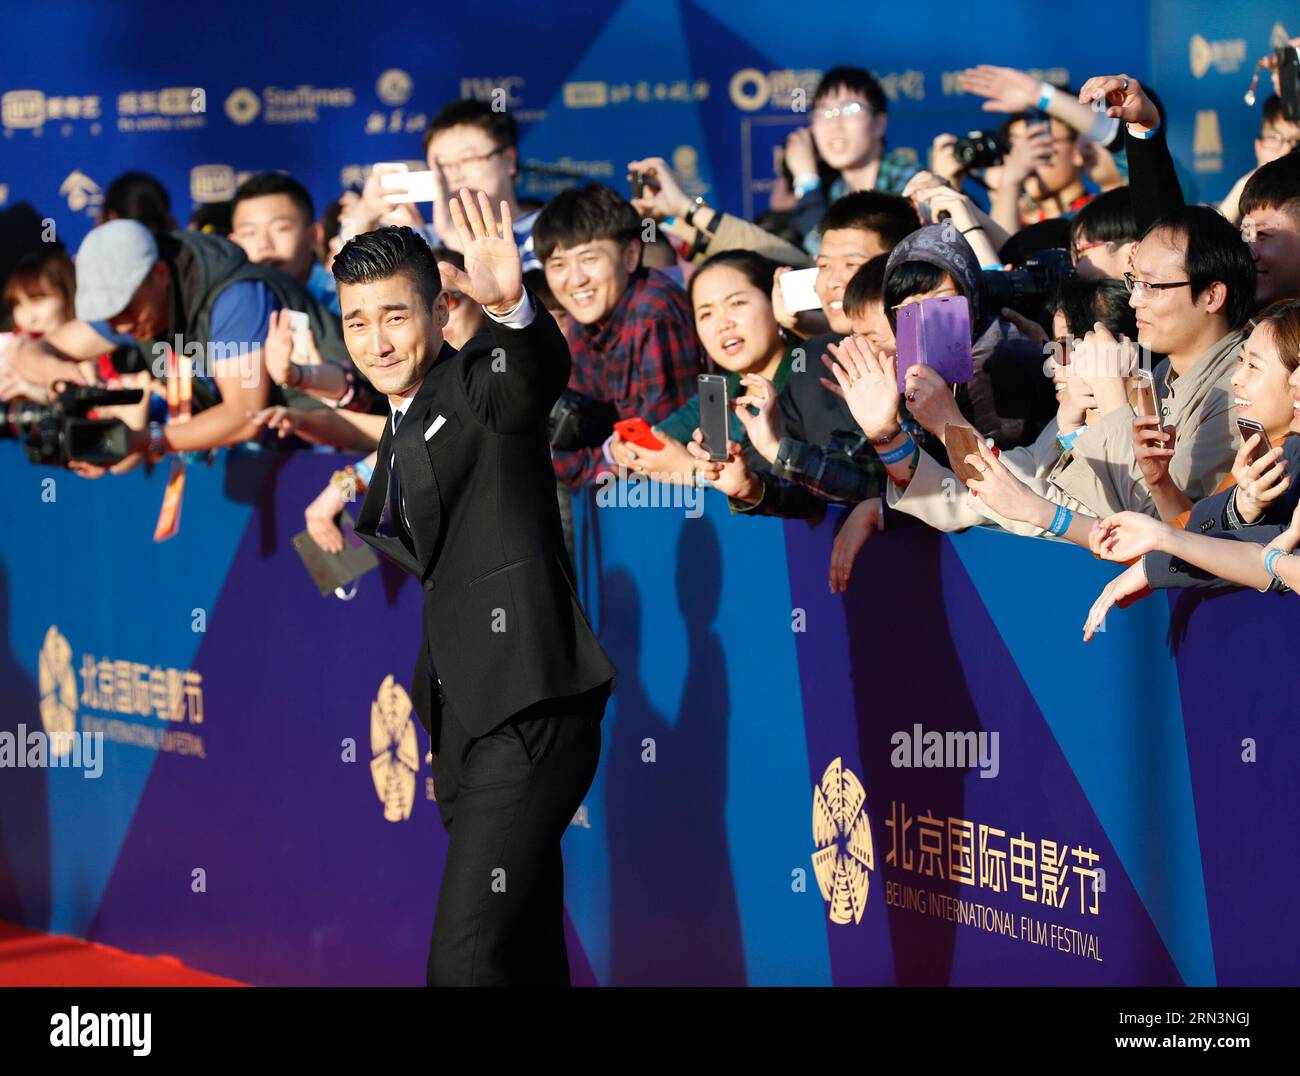 (150423) -- BEIJING, April 23, 2015 -- South Korean actor Choi Siwon of the movie Helios waves to the crowd as he walks the red carpet during the closing ceremony of the fifth Beijing International Film Festival (BJIFF) in Beijing, capital of China, April 23, 2015. The BJIFF closed here on Thursday. ) (mp) CHINA-BEIJING-FILM FESTIVAL-CLOSING (CN) ShenxBohan PUBLICATIONxNOTxINxCHN   Beijing April 23 2015 South Korean Actor Choi  of The Movie Helios Waves to The Crowd As he Walks The Red Carpet during The CLOSING Ceremony of The Fifth Beijing International Film Festival  in Beijing Capital of Ch Stock Photo